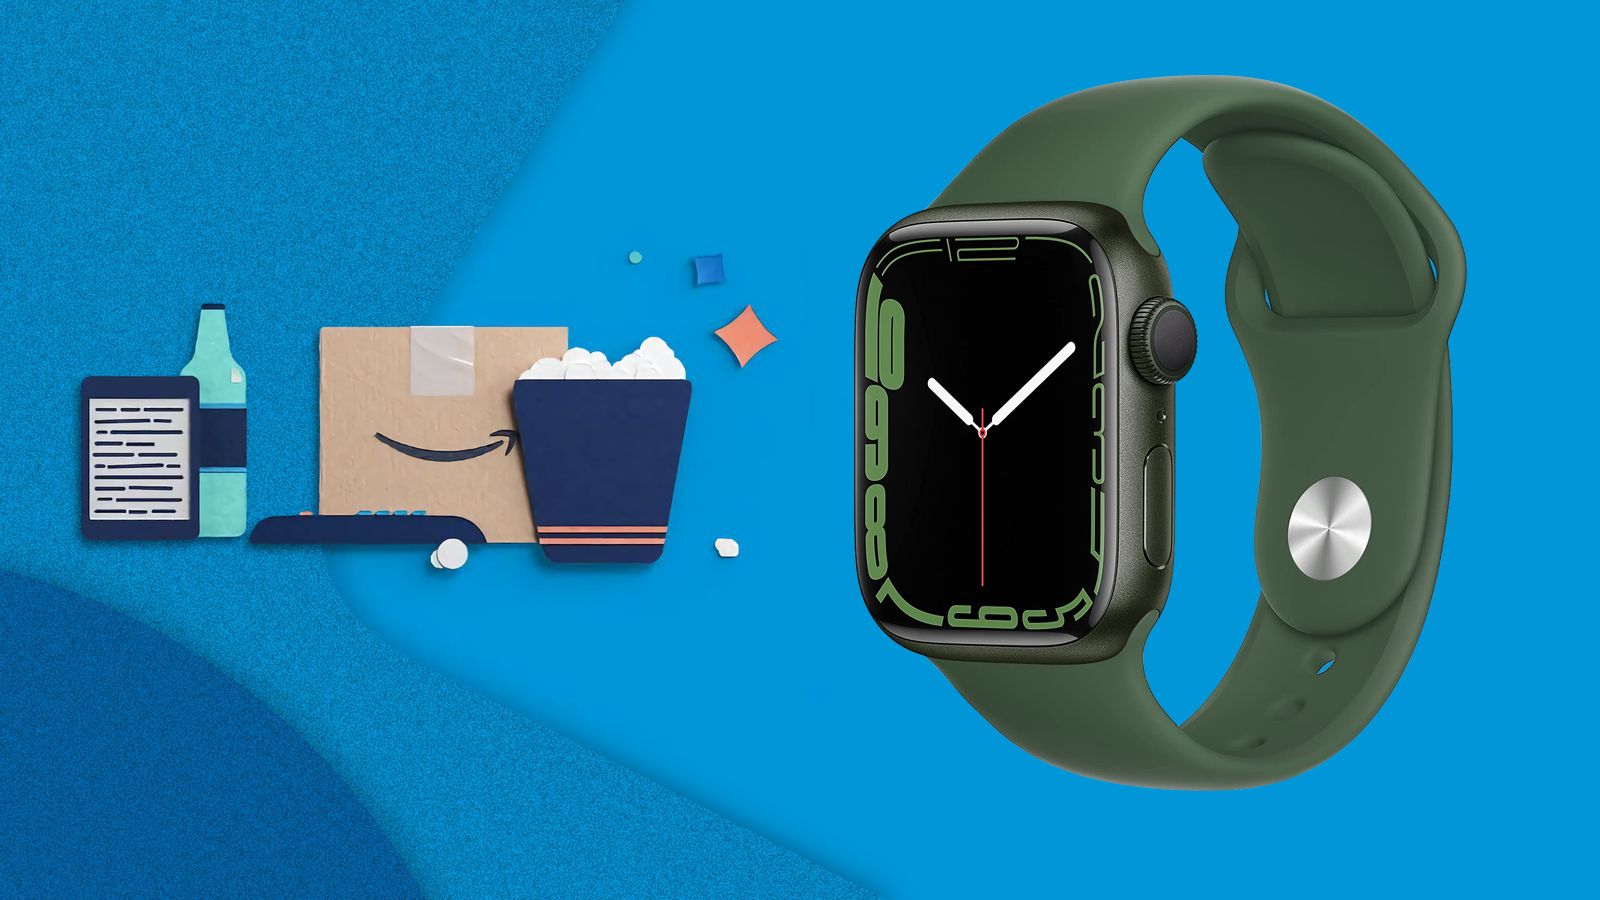 Amazon Prime Day: Apple Watch Series 7 Drops to Record Low Price of $284.00 ($115 Off)